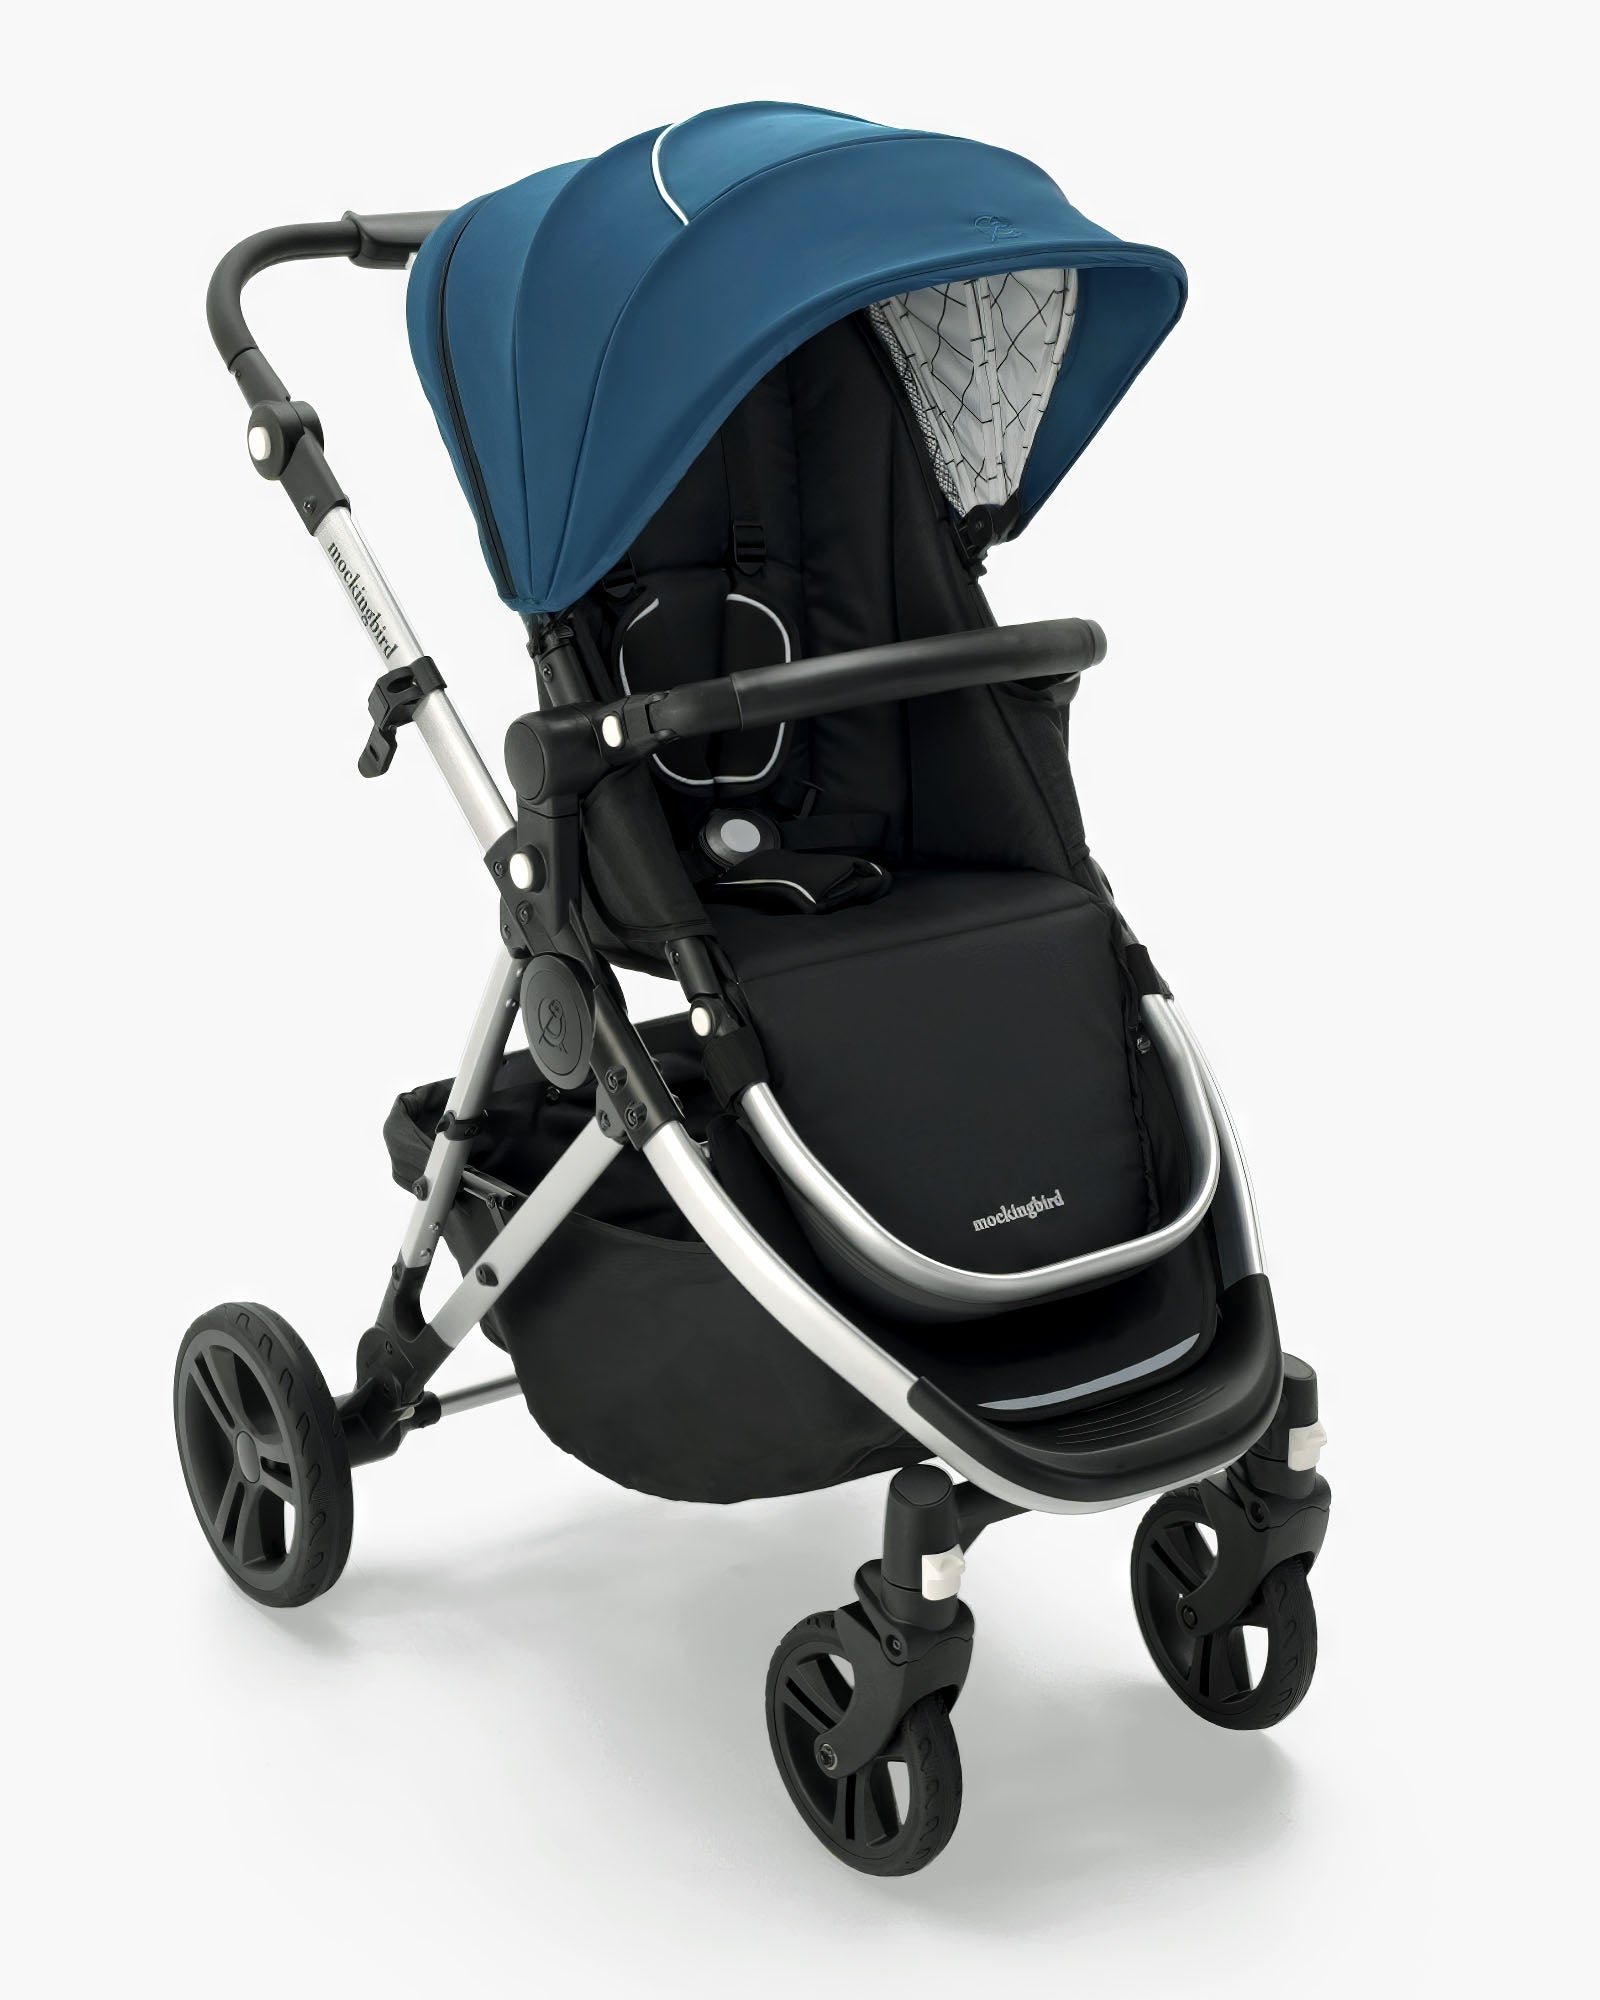 Modern black and blue Mockingbird Single Stroller 2.0 baby stroller with adjustable handle, canopy, and large wheels, shown isolated on a white background. #color_sea